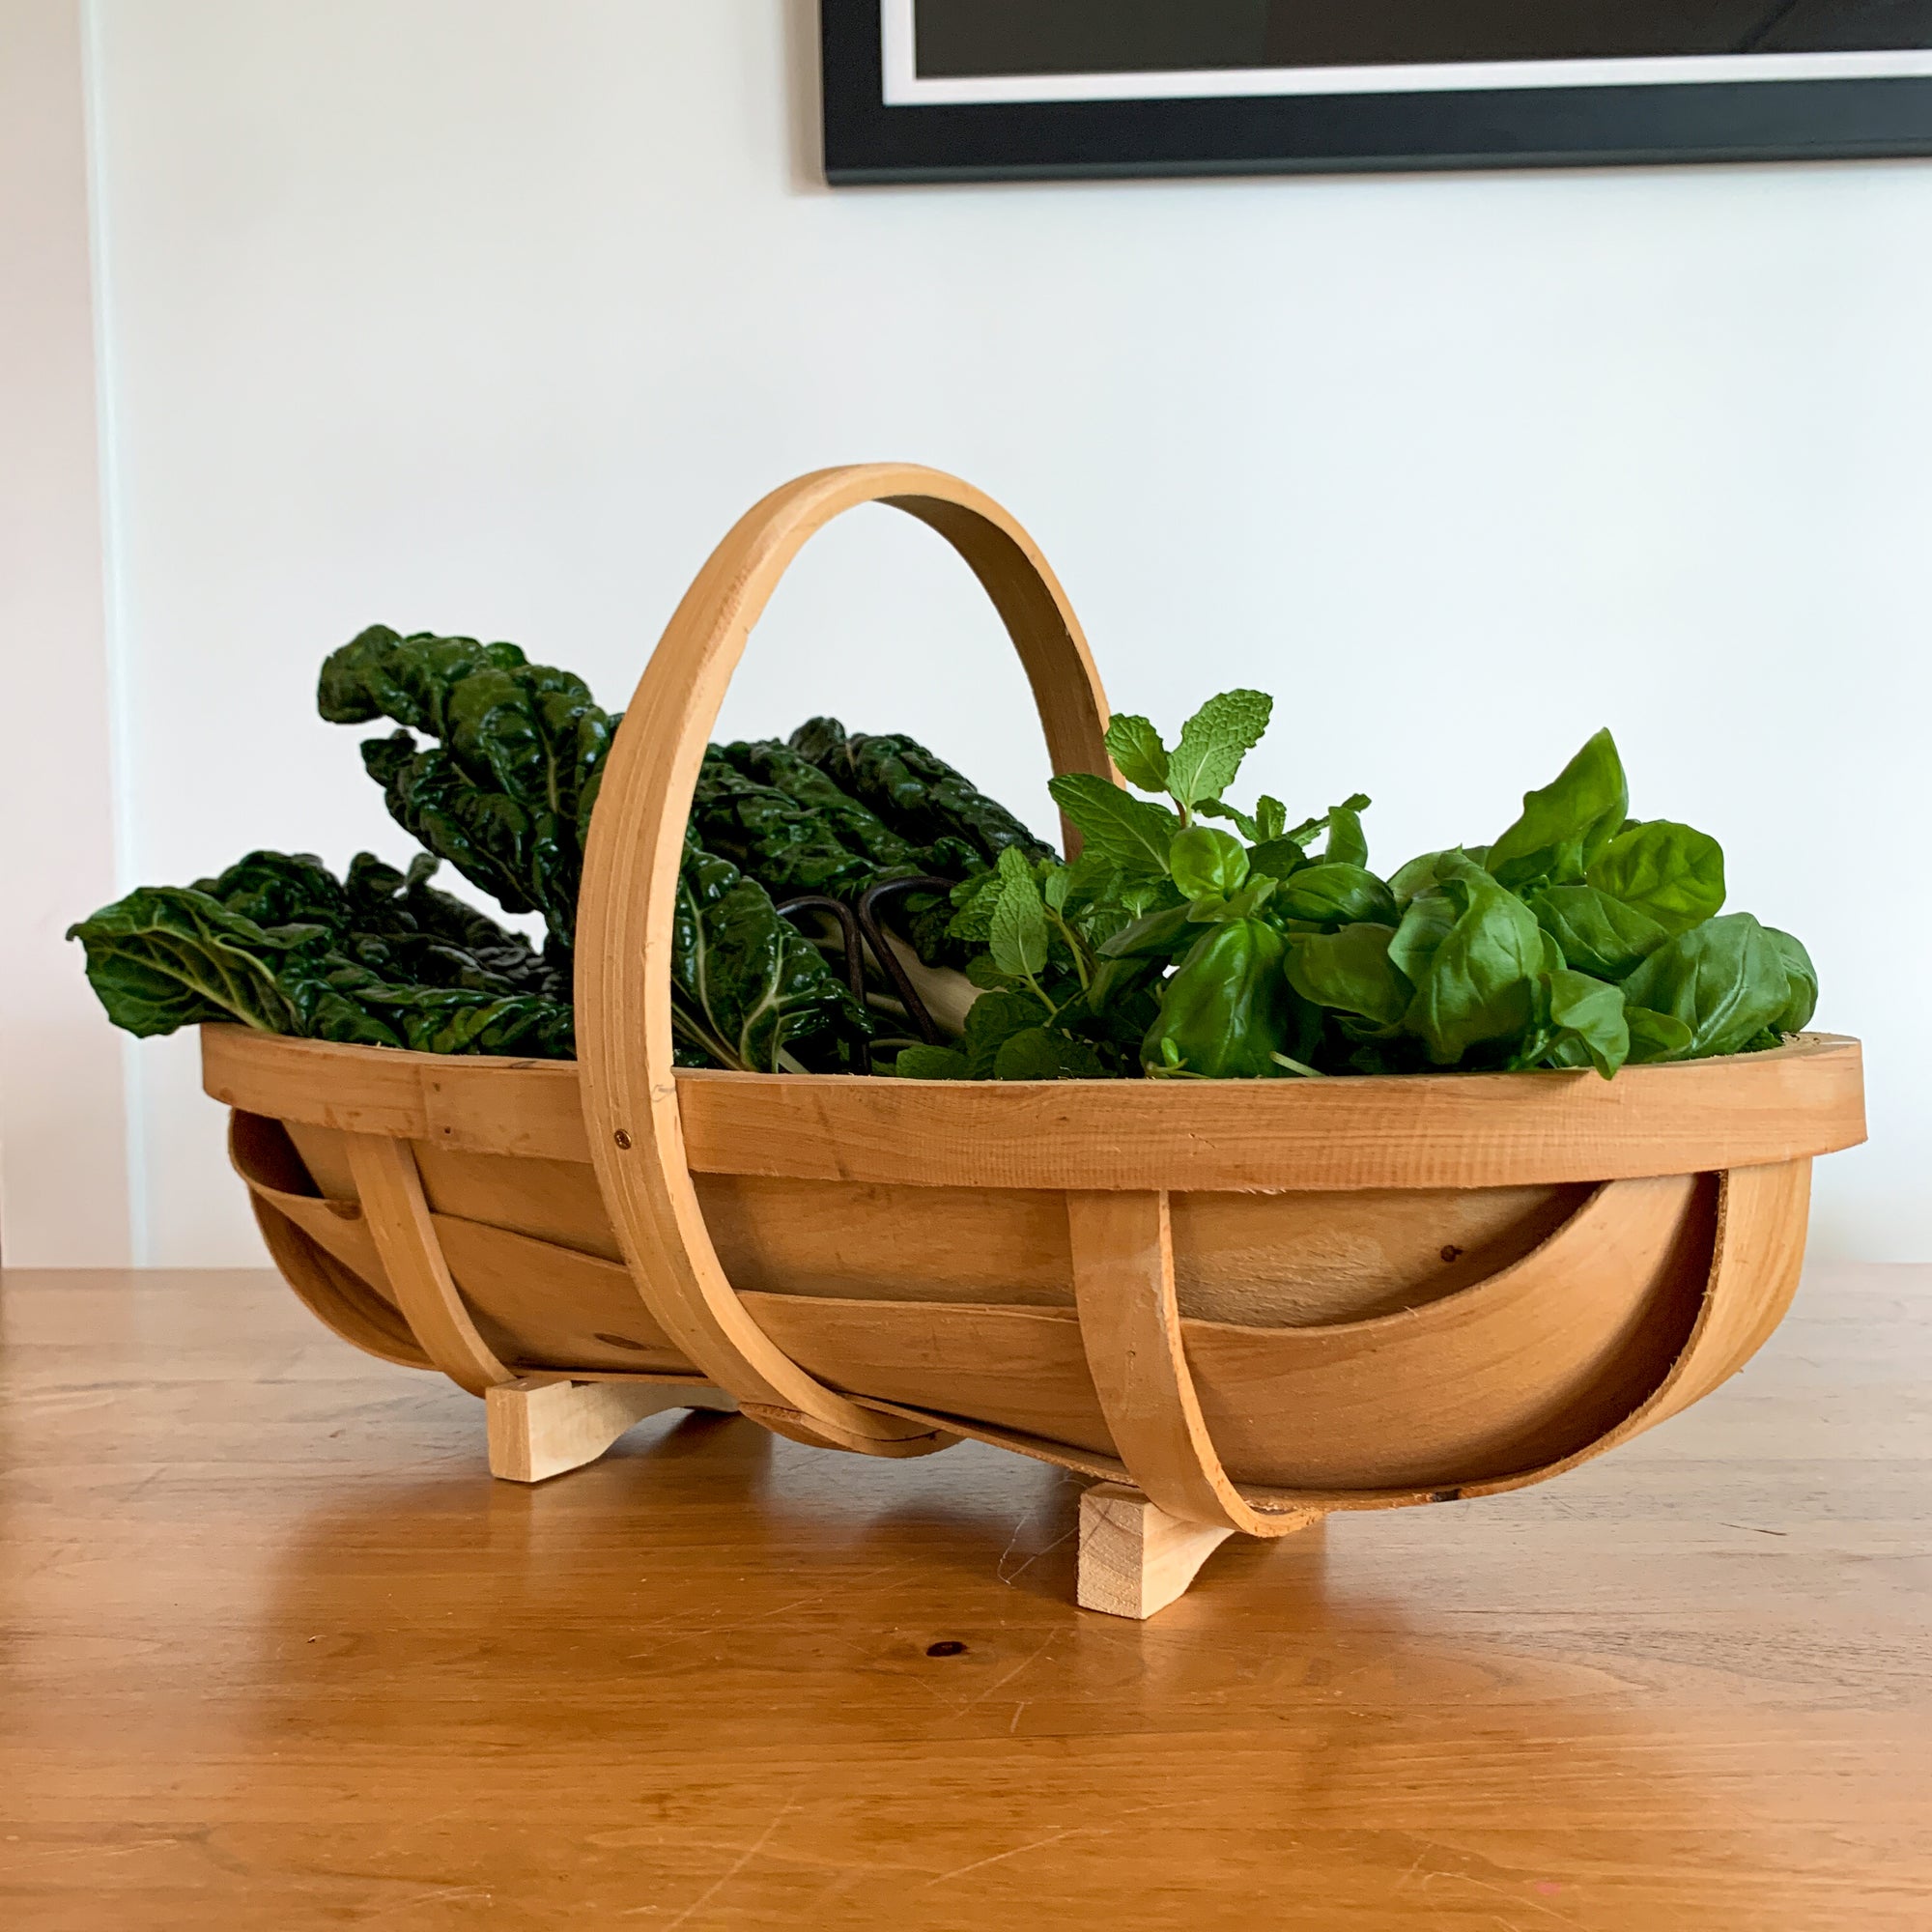 TRADITIONAL WOODEN TRUG